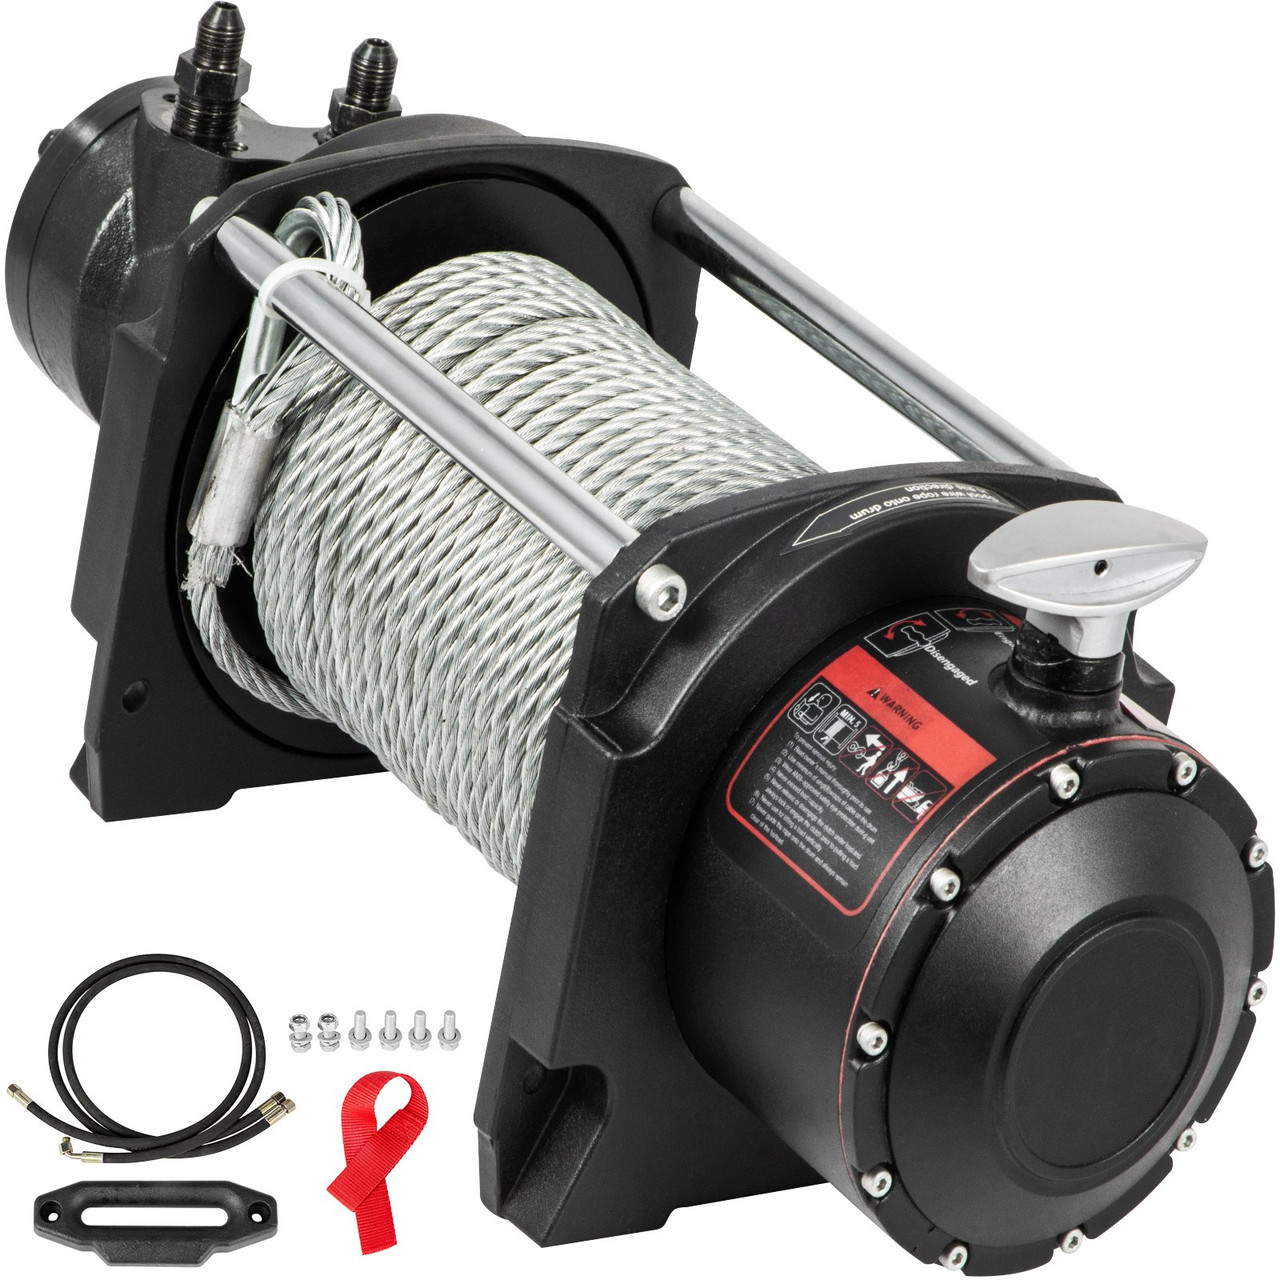 Industrial Hydraulic Winch 10,000lbs, Hydraulic Anchor Winch with 24m Strong Steel Cable, Hydraulic Drive Winch Adapter Kit, Utility Winch with Mechanical Lock for Tacoma Yukon Hummer, etc.